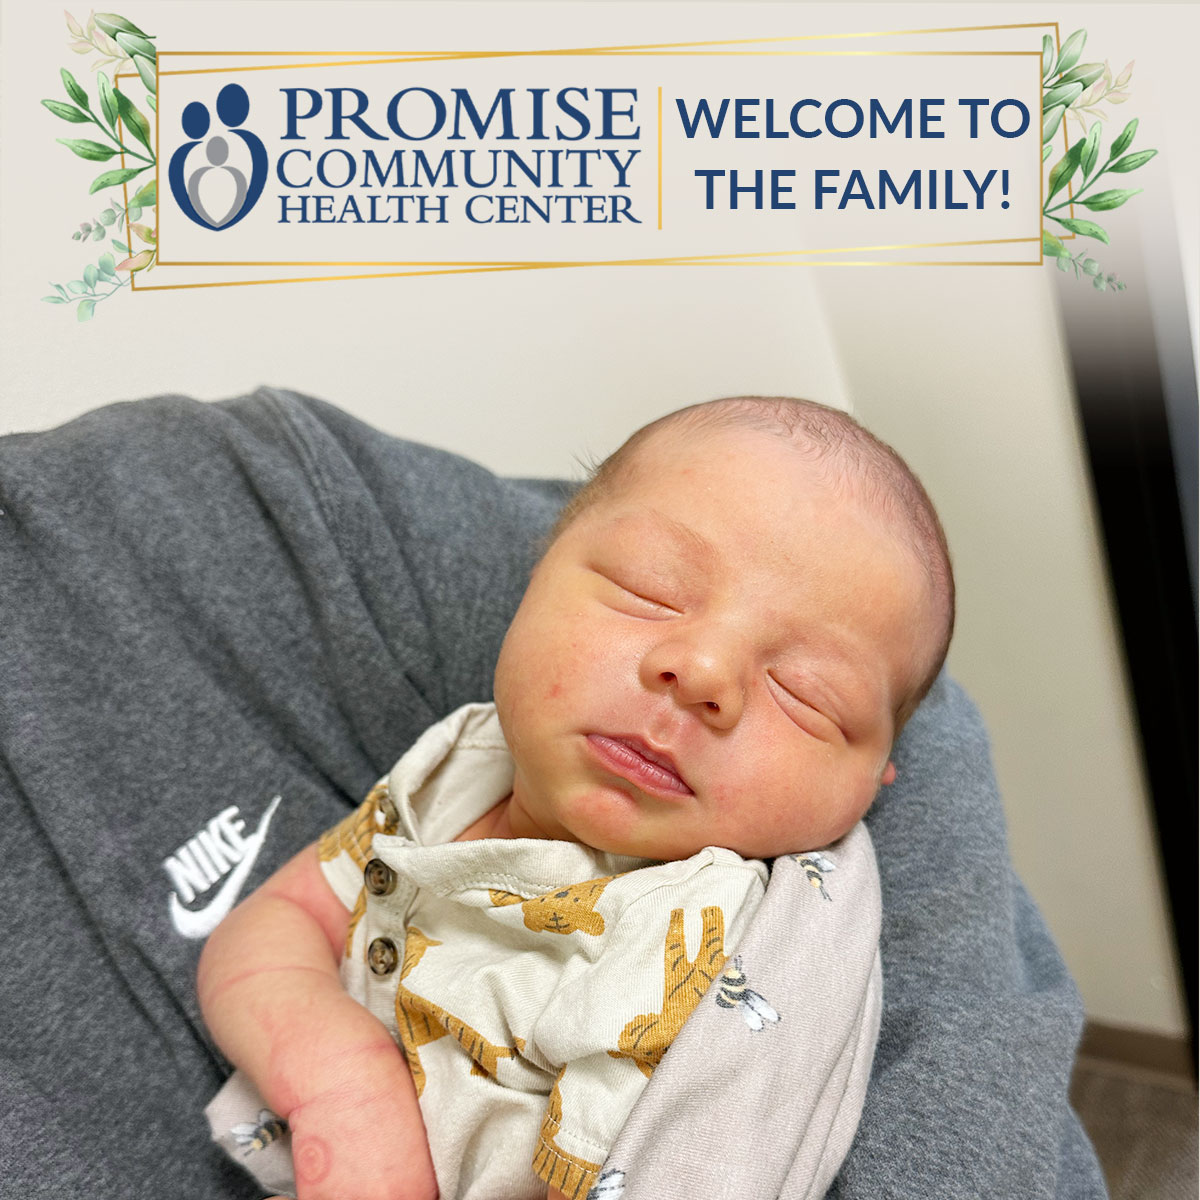 Home birth in Sioux City, Iowa | Promise Community Health Center in Sioux Center, Iowa | Midwives in northwest Iowa, Midwives in southeast South Dakota, Midwives in southwest Minnesota | Midwives in Sioux Falls South Dakota, Midwives in Beresford South Dakota, Midwives in Sioux City IA, Midwives in LeMars IA, Midwives in Worthington MN, Midwives in Iowa, Midwives in South Dakota, Midwives in Minnesota